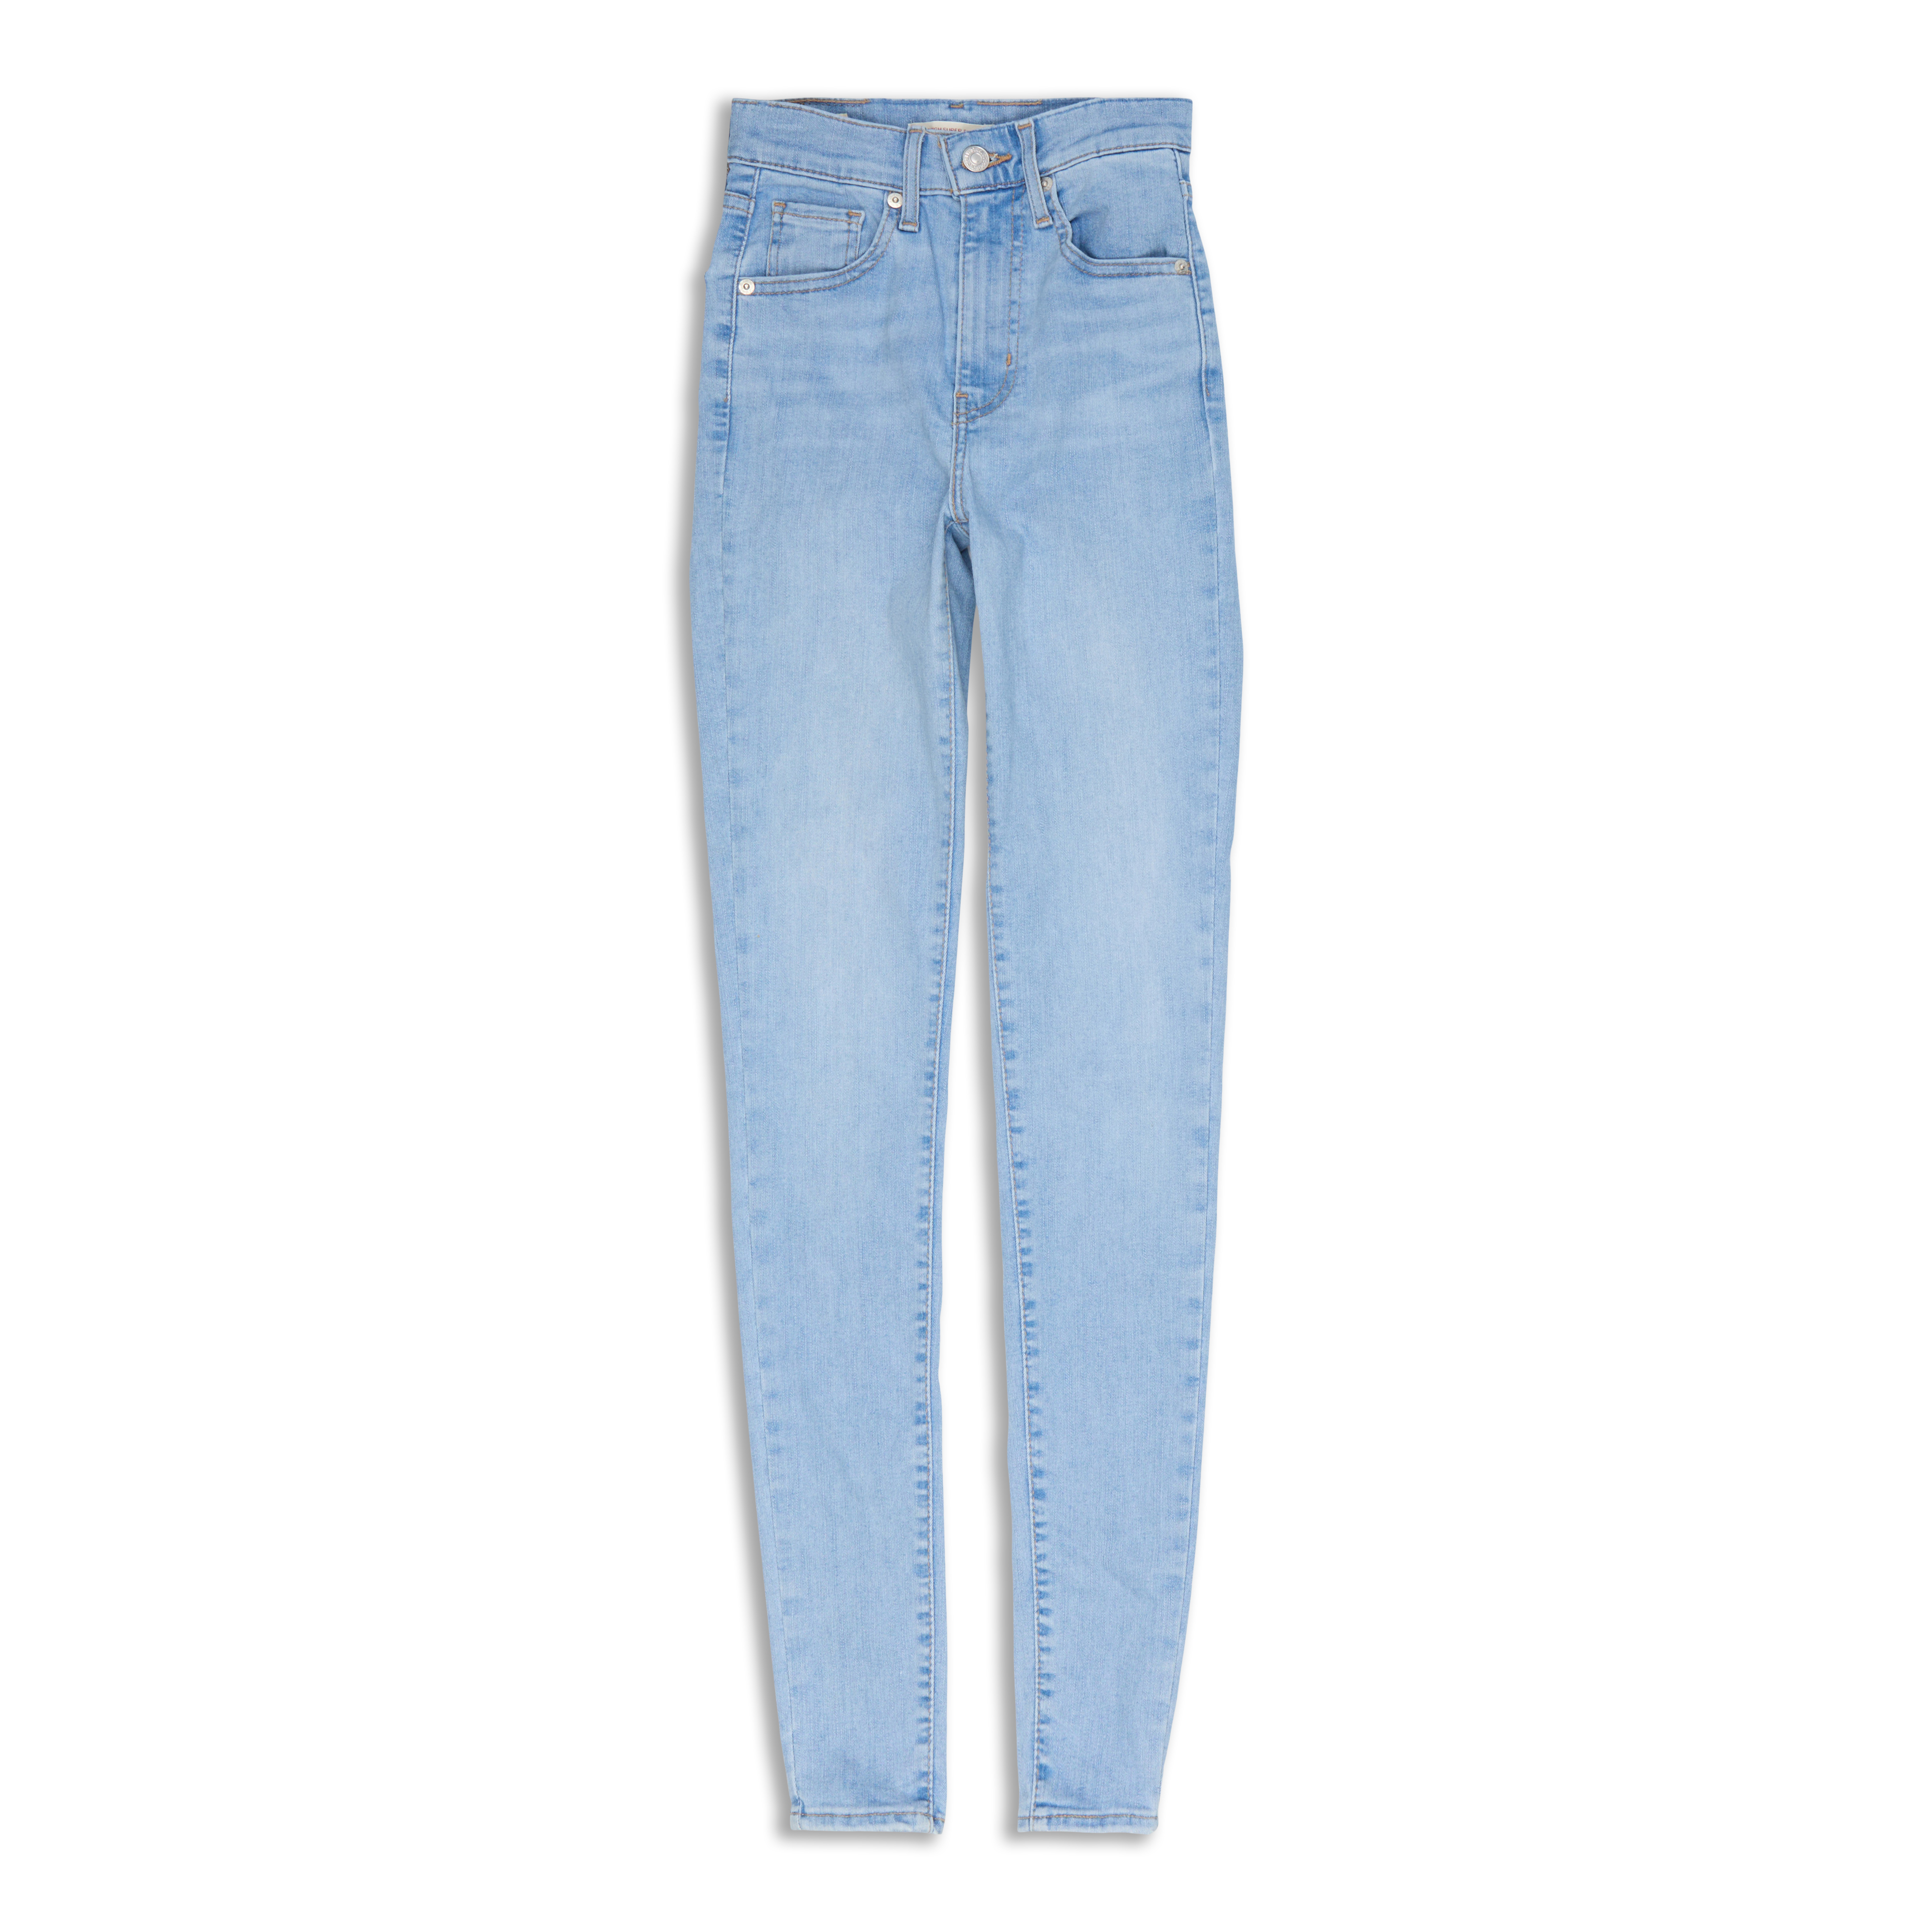 Levis Mile High Super Skinny Women's Jeans Between Space And Time